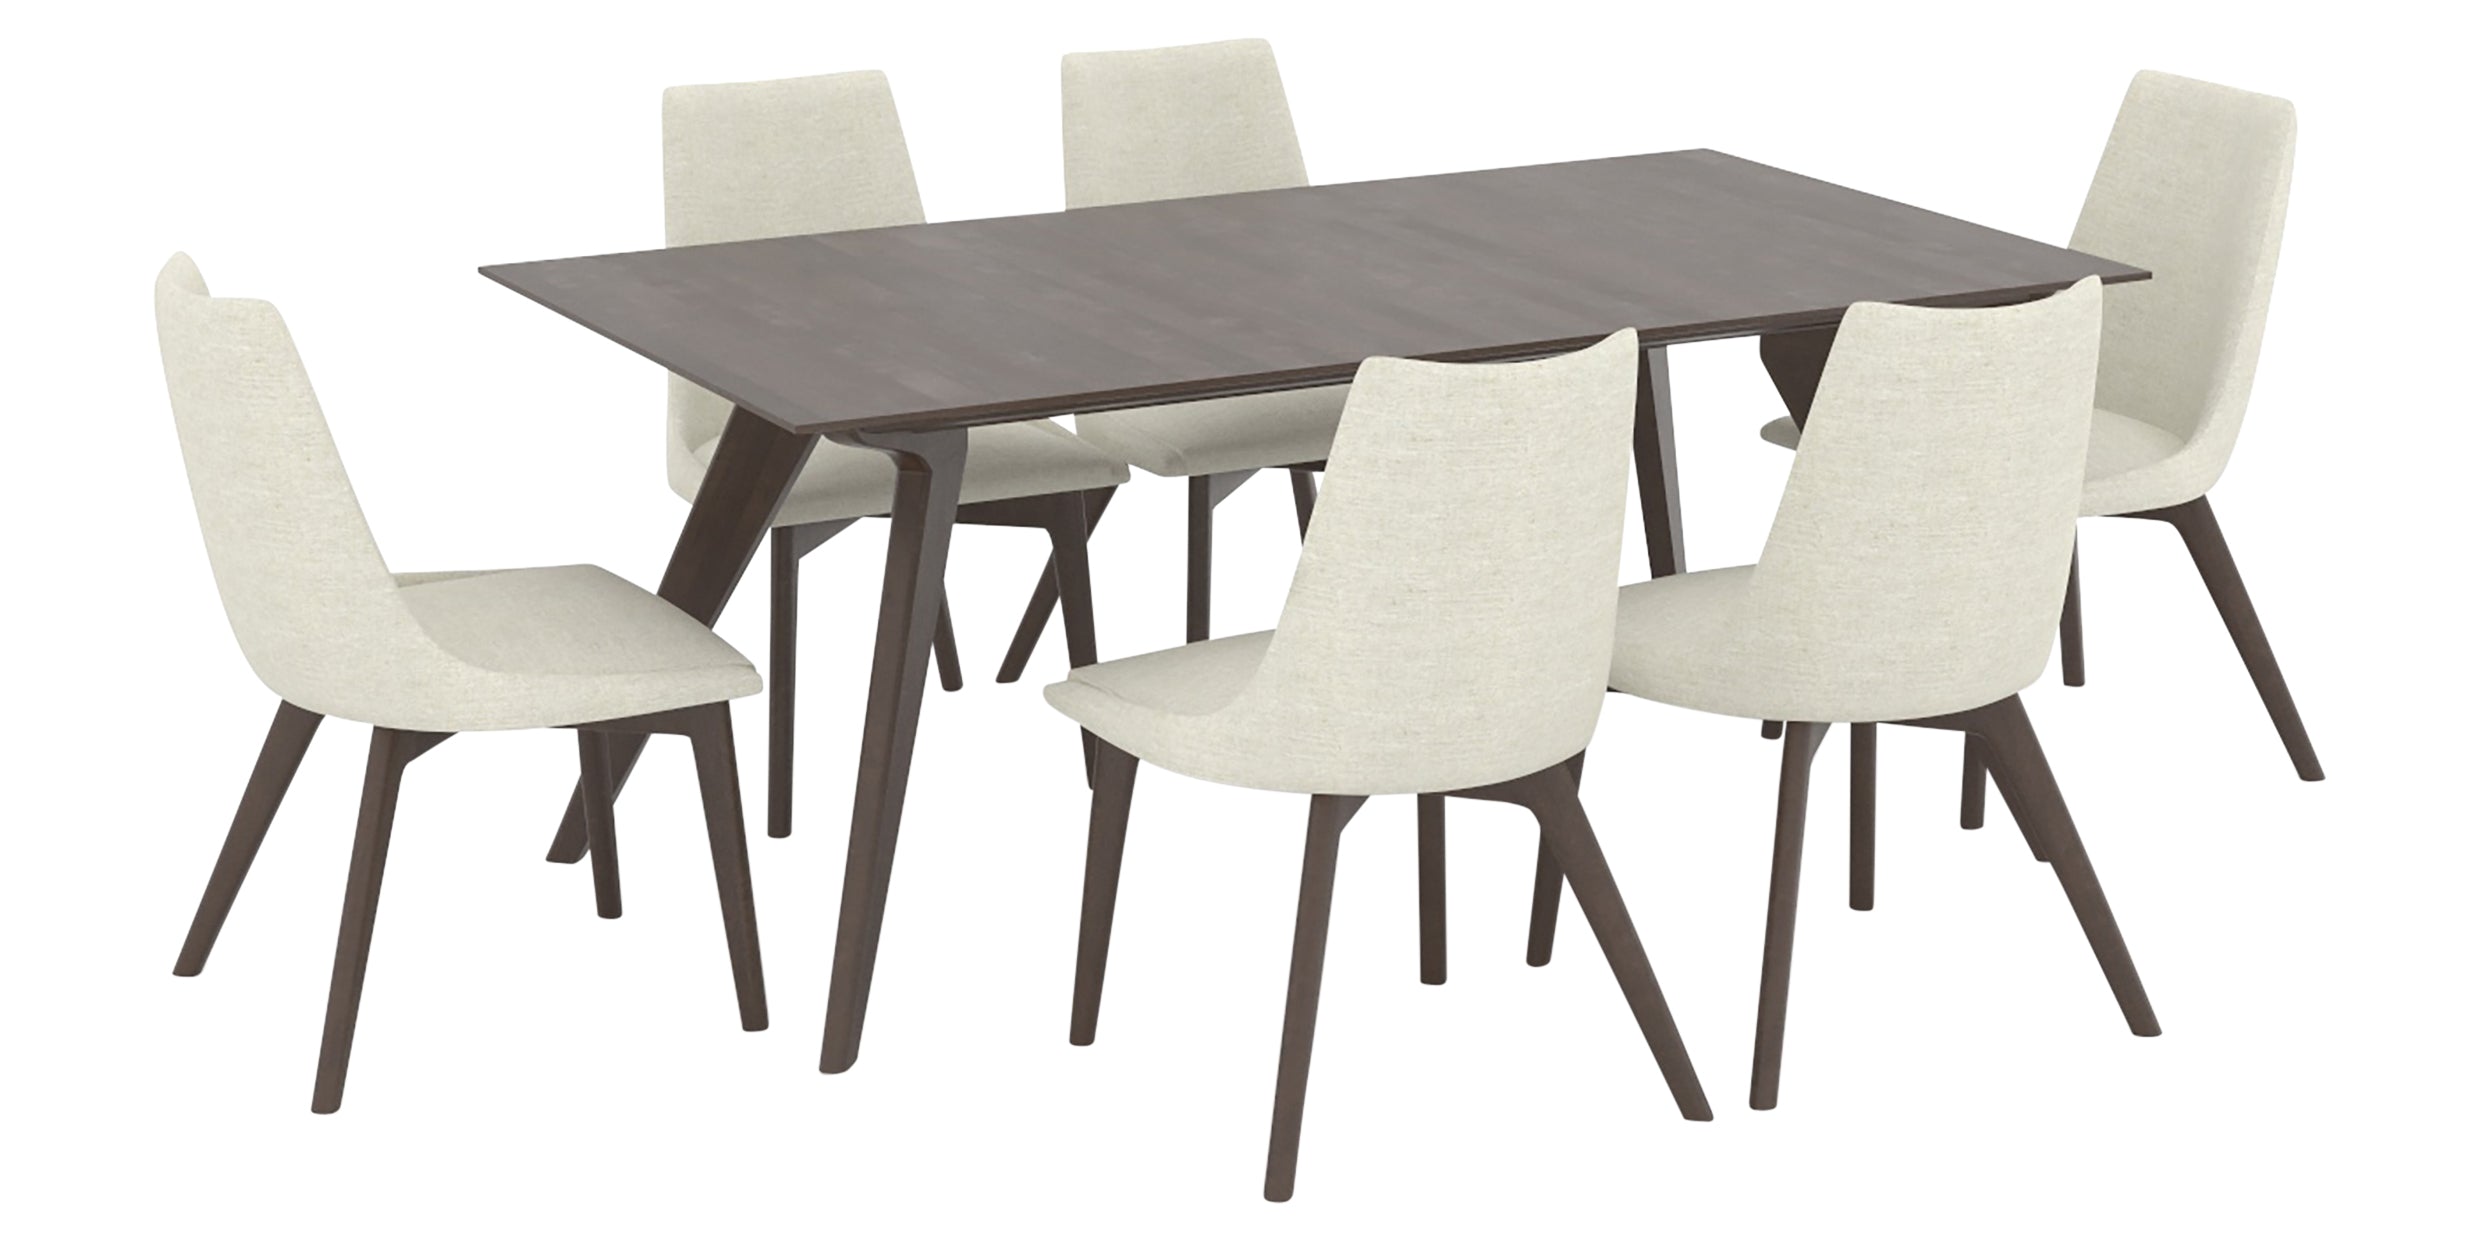 Hazelnut Washed Birch with Matte Finish and TW Fabric | Canadel Downtown 4072 Dining Set - Floor Model | Valley Ridge Furniture